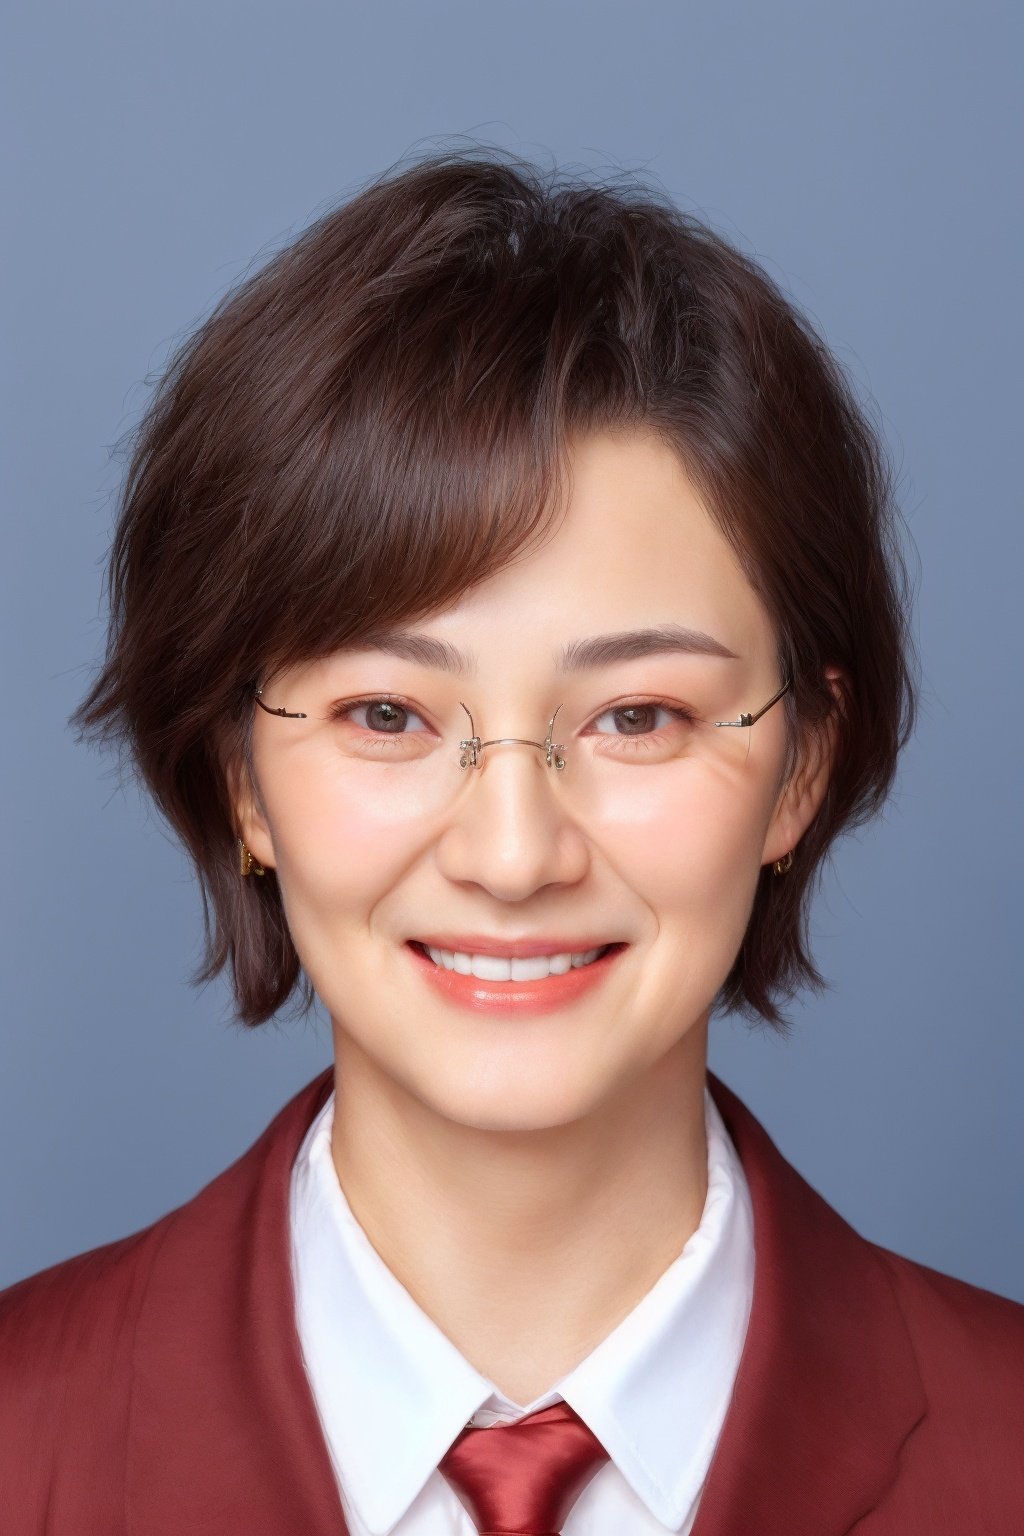 ID photo, (an old man: 1.5), solo, upper body, a short-haired old man in a suit, glasses, (long beard: 1.5), red tie. She smiles at the camera, (red solid background: 1.5), blue_IDphoto